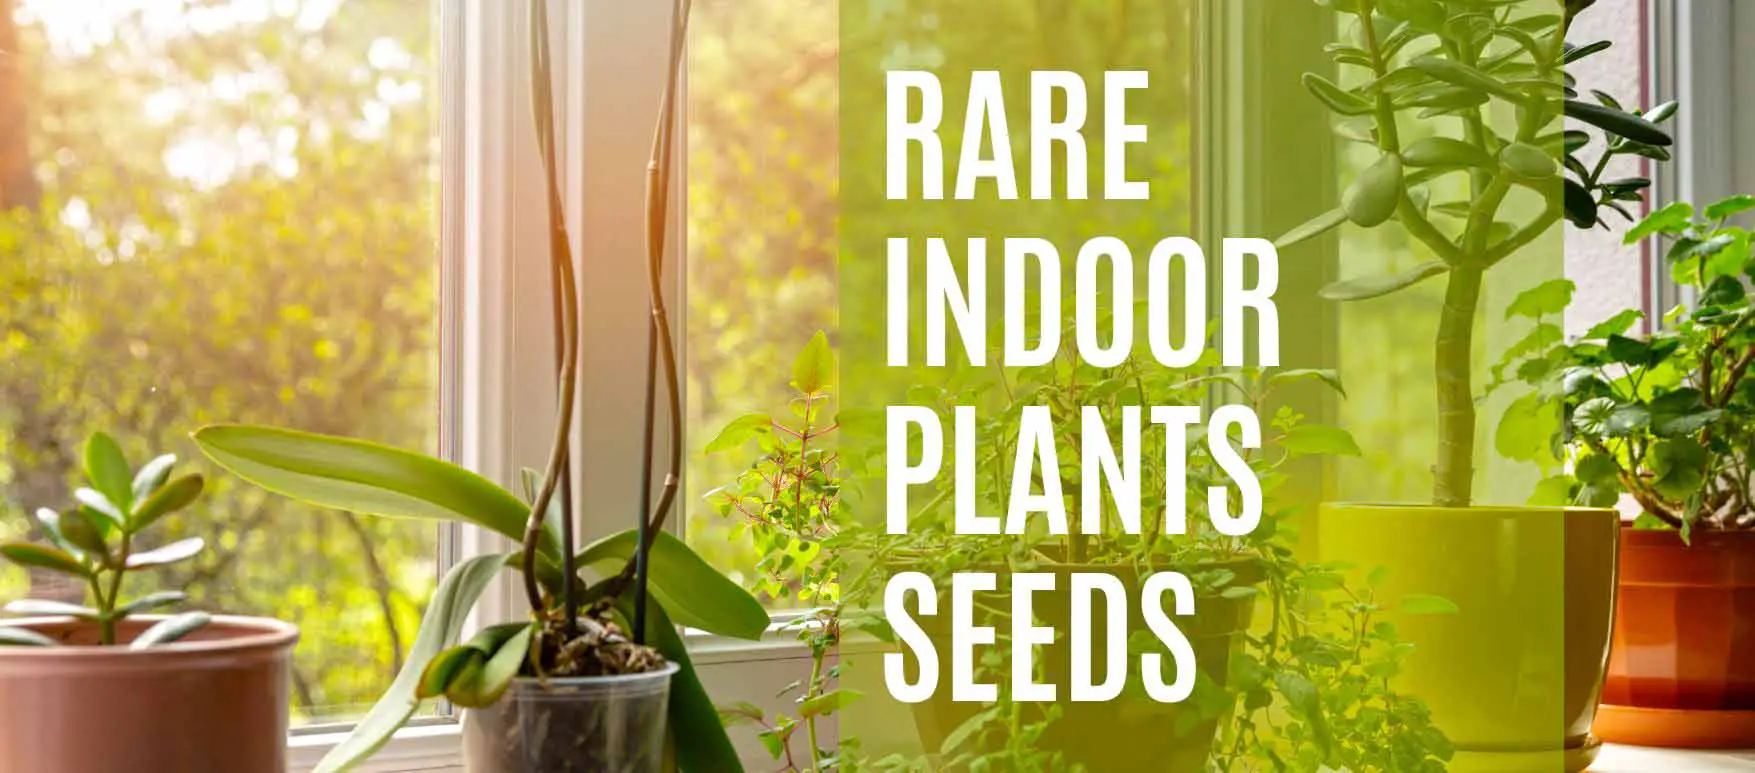 Where can you find seeds for rare indoor plants